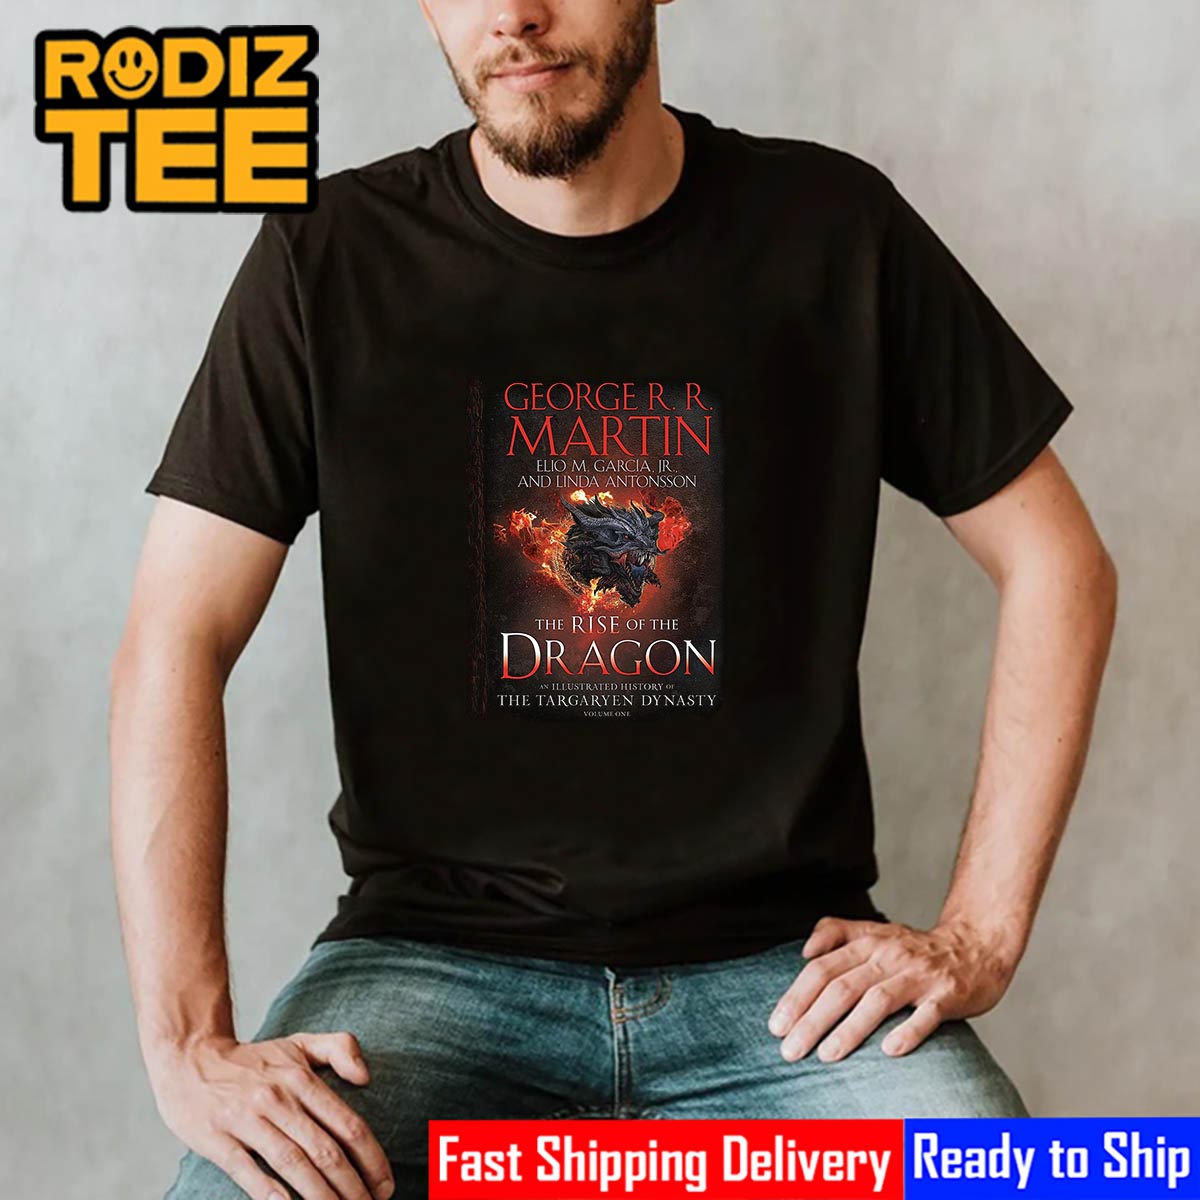 The Rise Of The Dragon An Illustrated History Of The Targaryen Dynasty Best T-Shirt